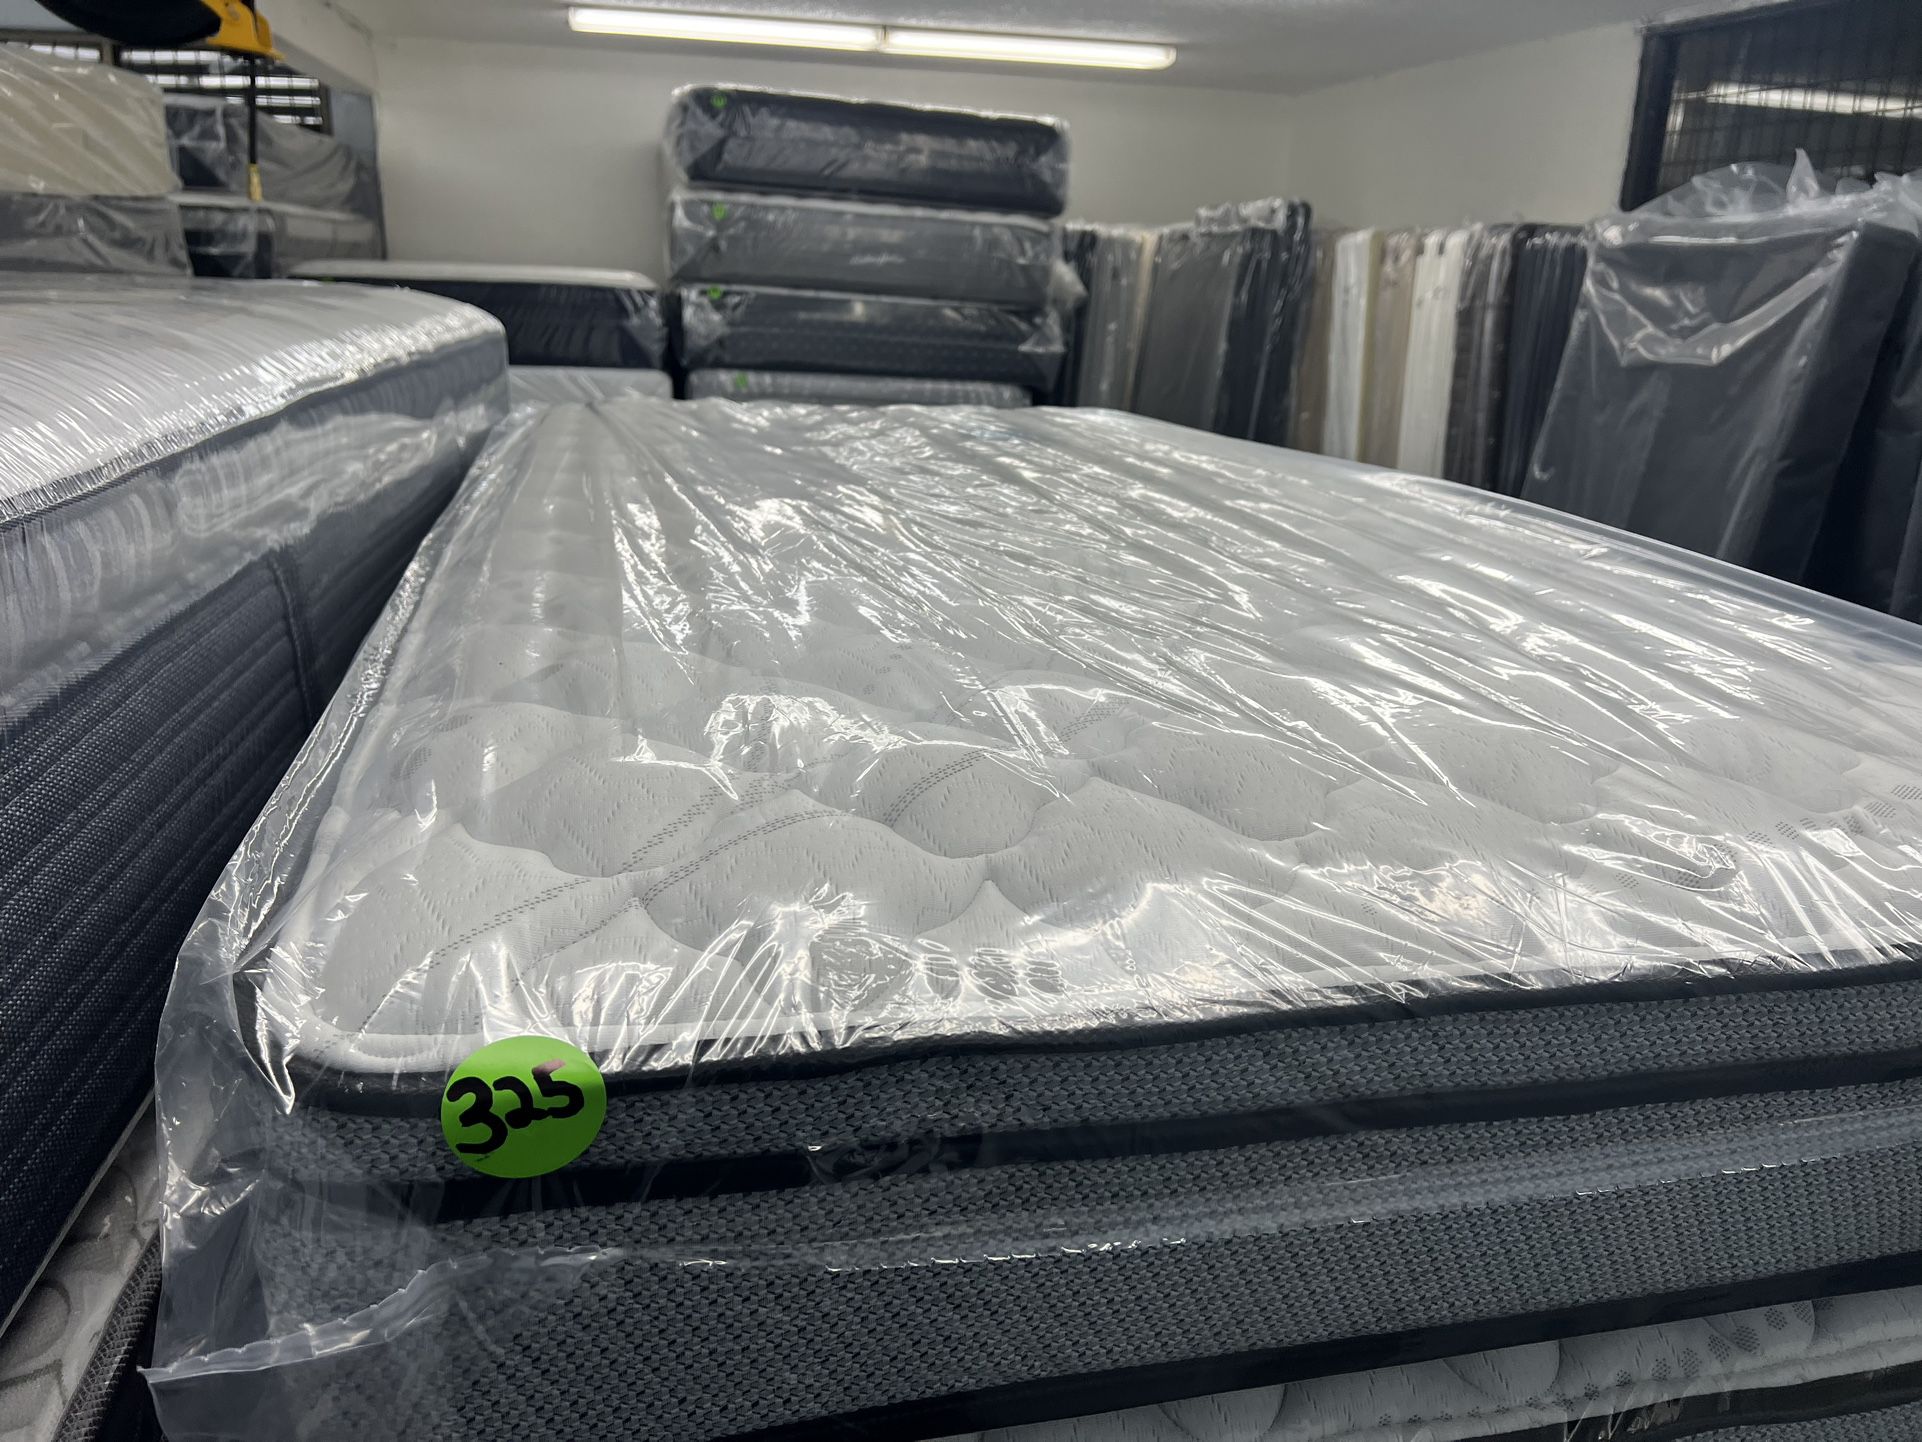 BRAND NEW WITH WARRANTY TWIN SIZE EUROTOP MATTRESS & BOX SPRING BED SET